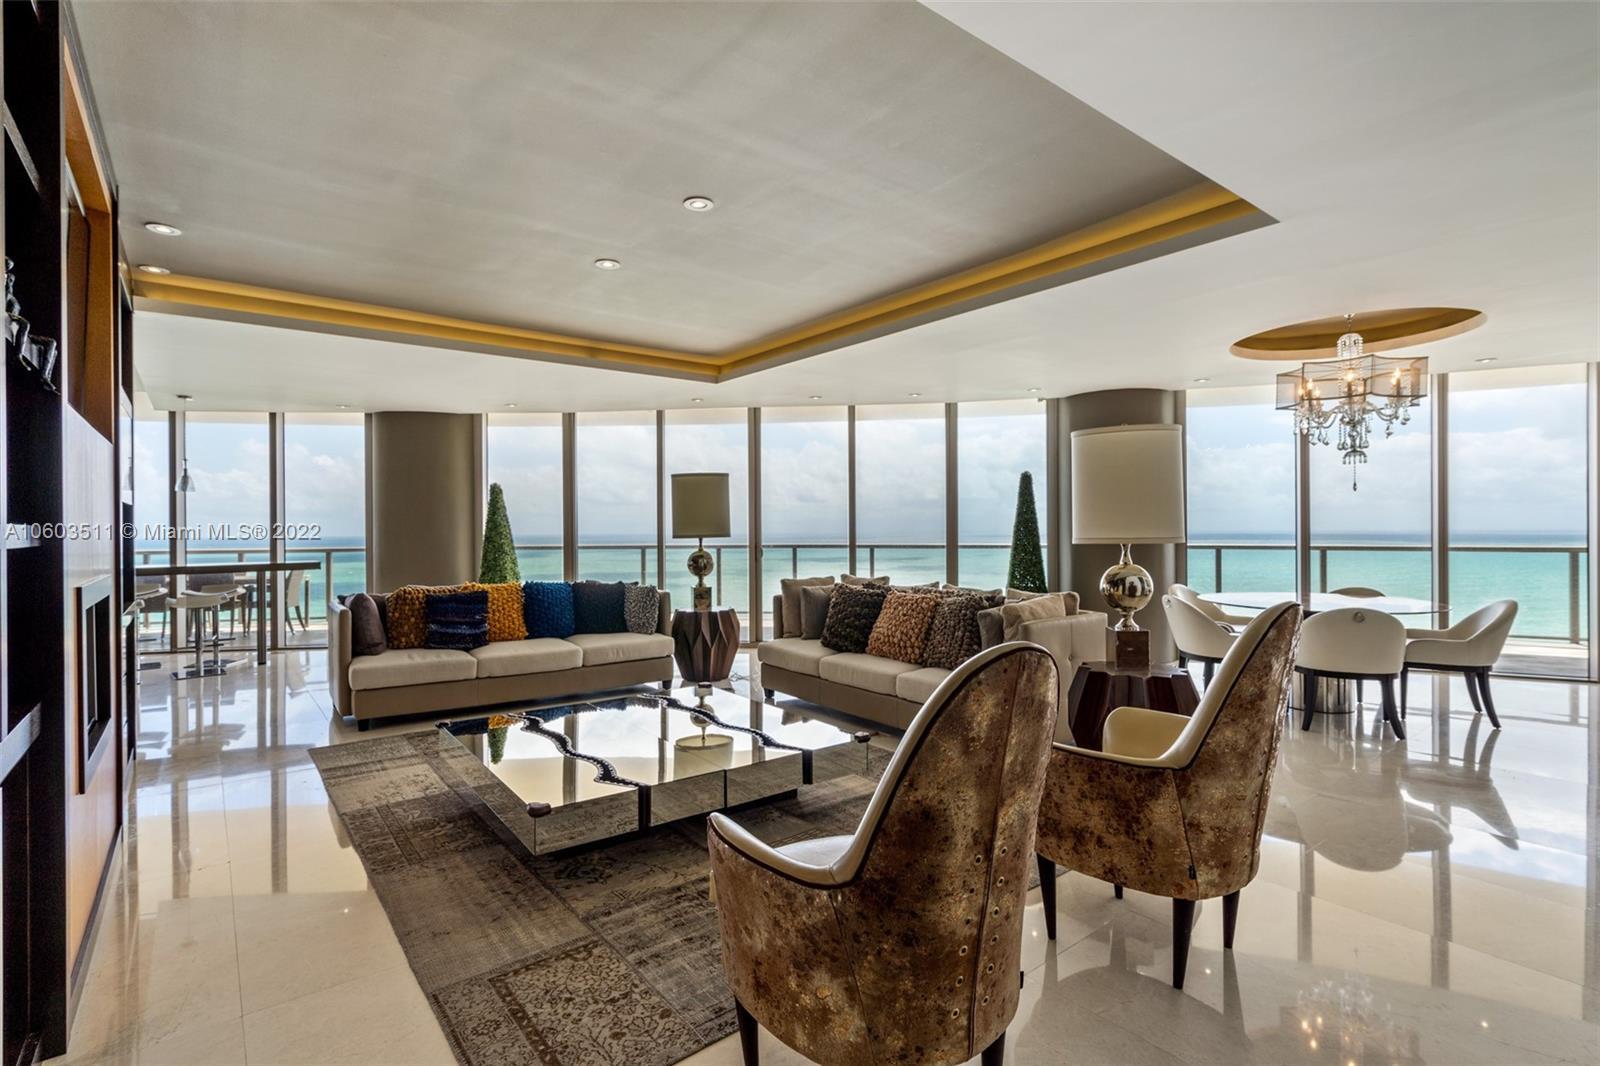 Exquisitely finished and furnished residence at the St. Regis Bal Harbour Center (Hotel Tower). 3 be